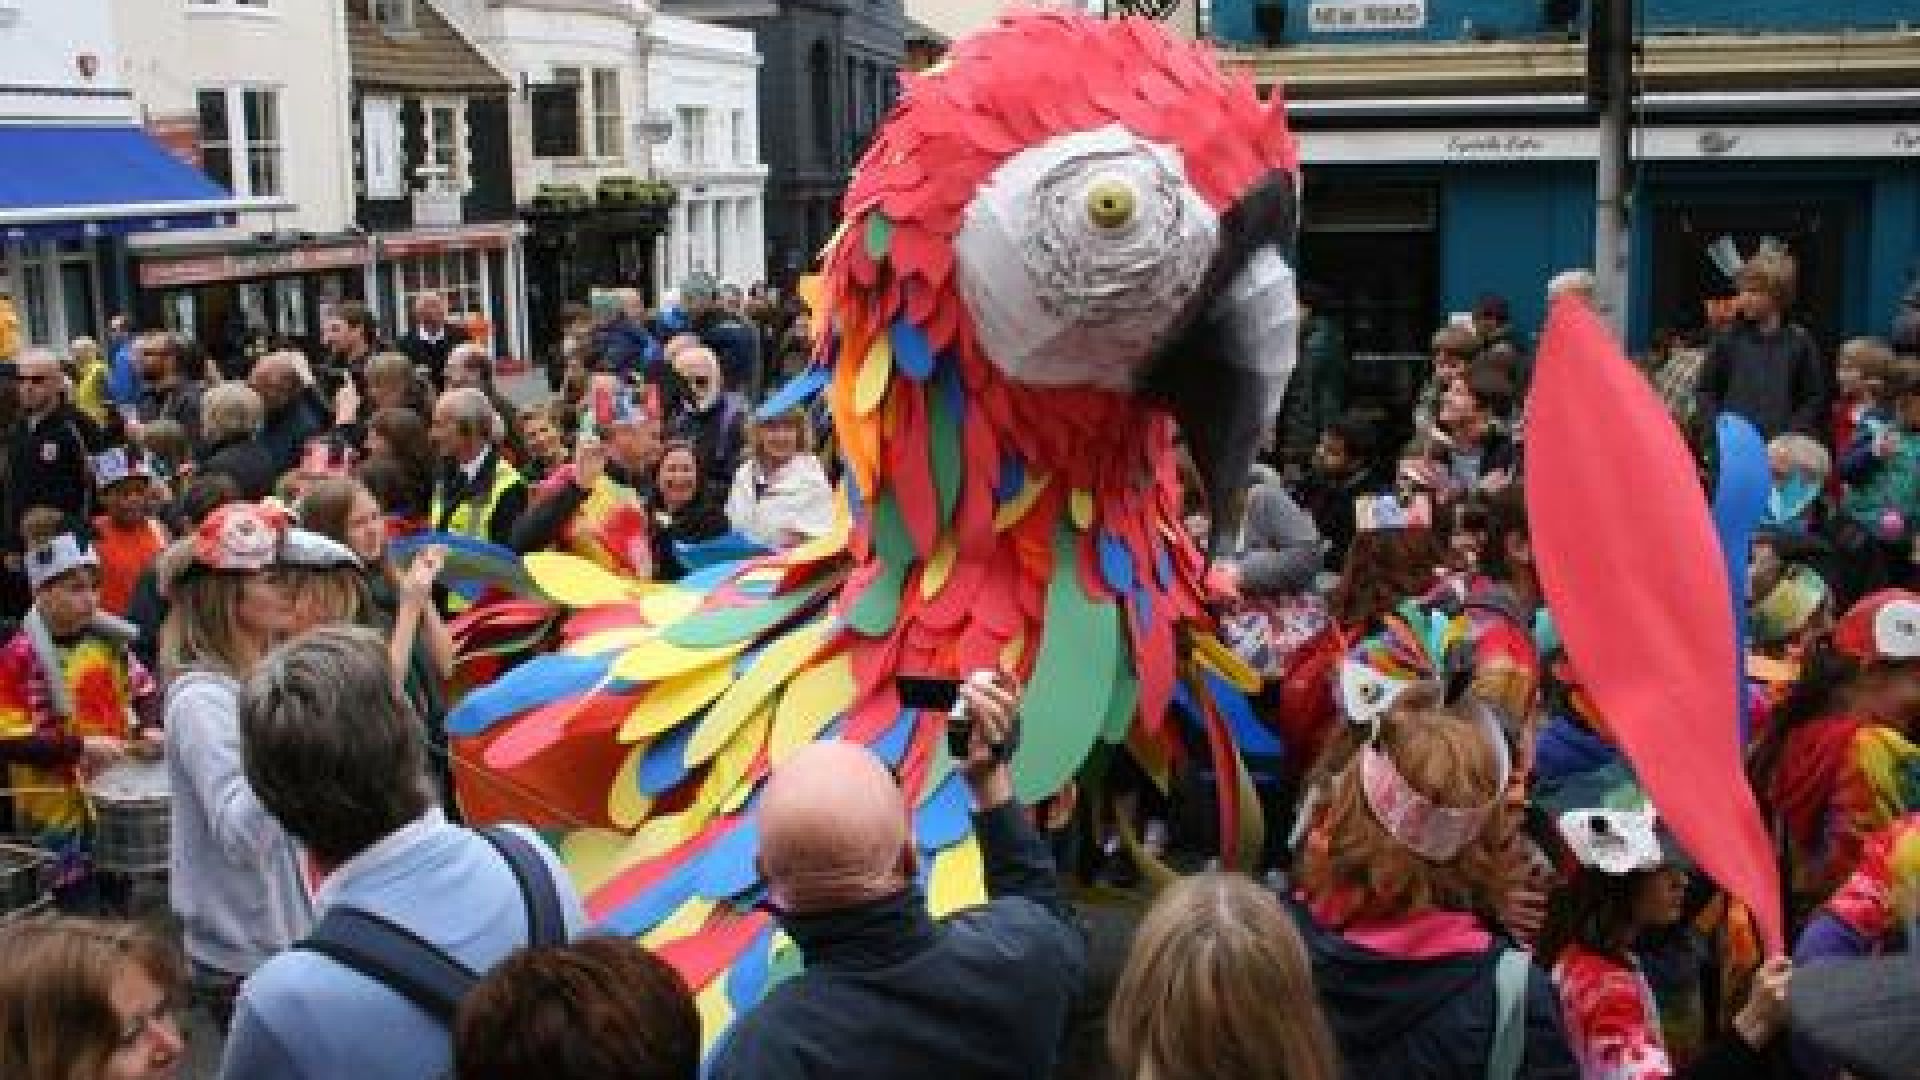 A parrot on parade – using hot melts!